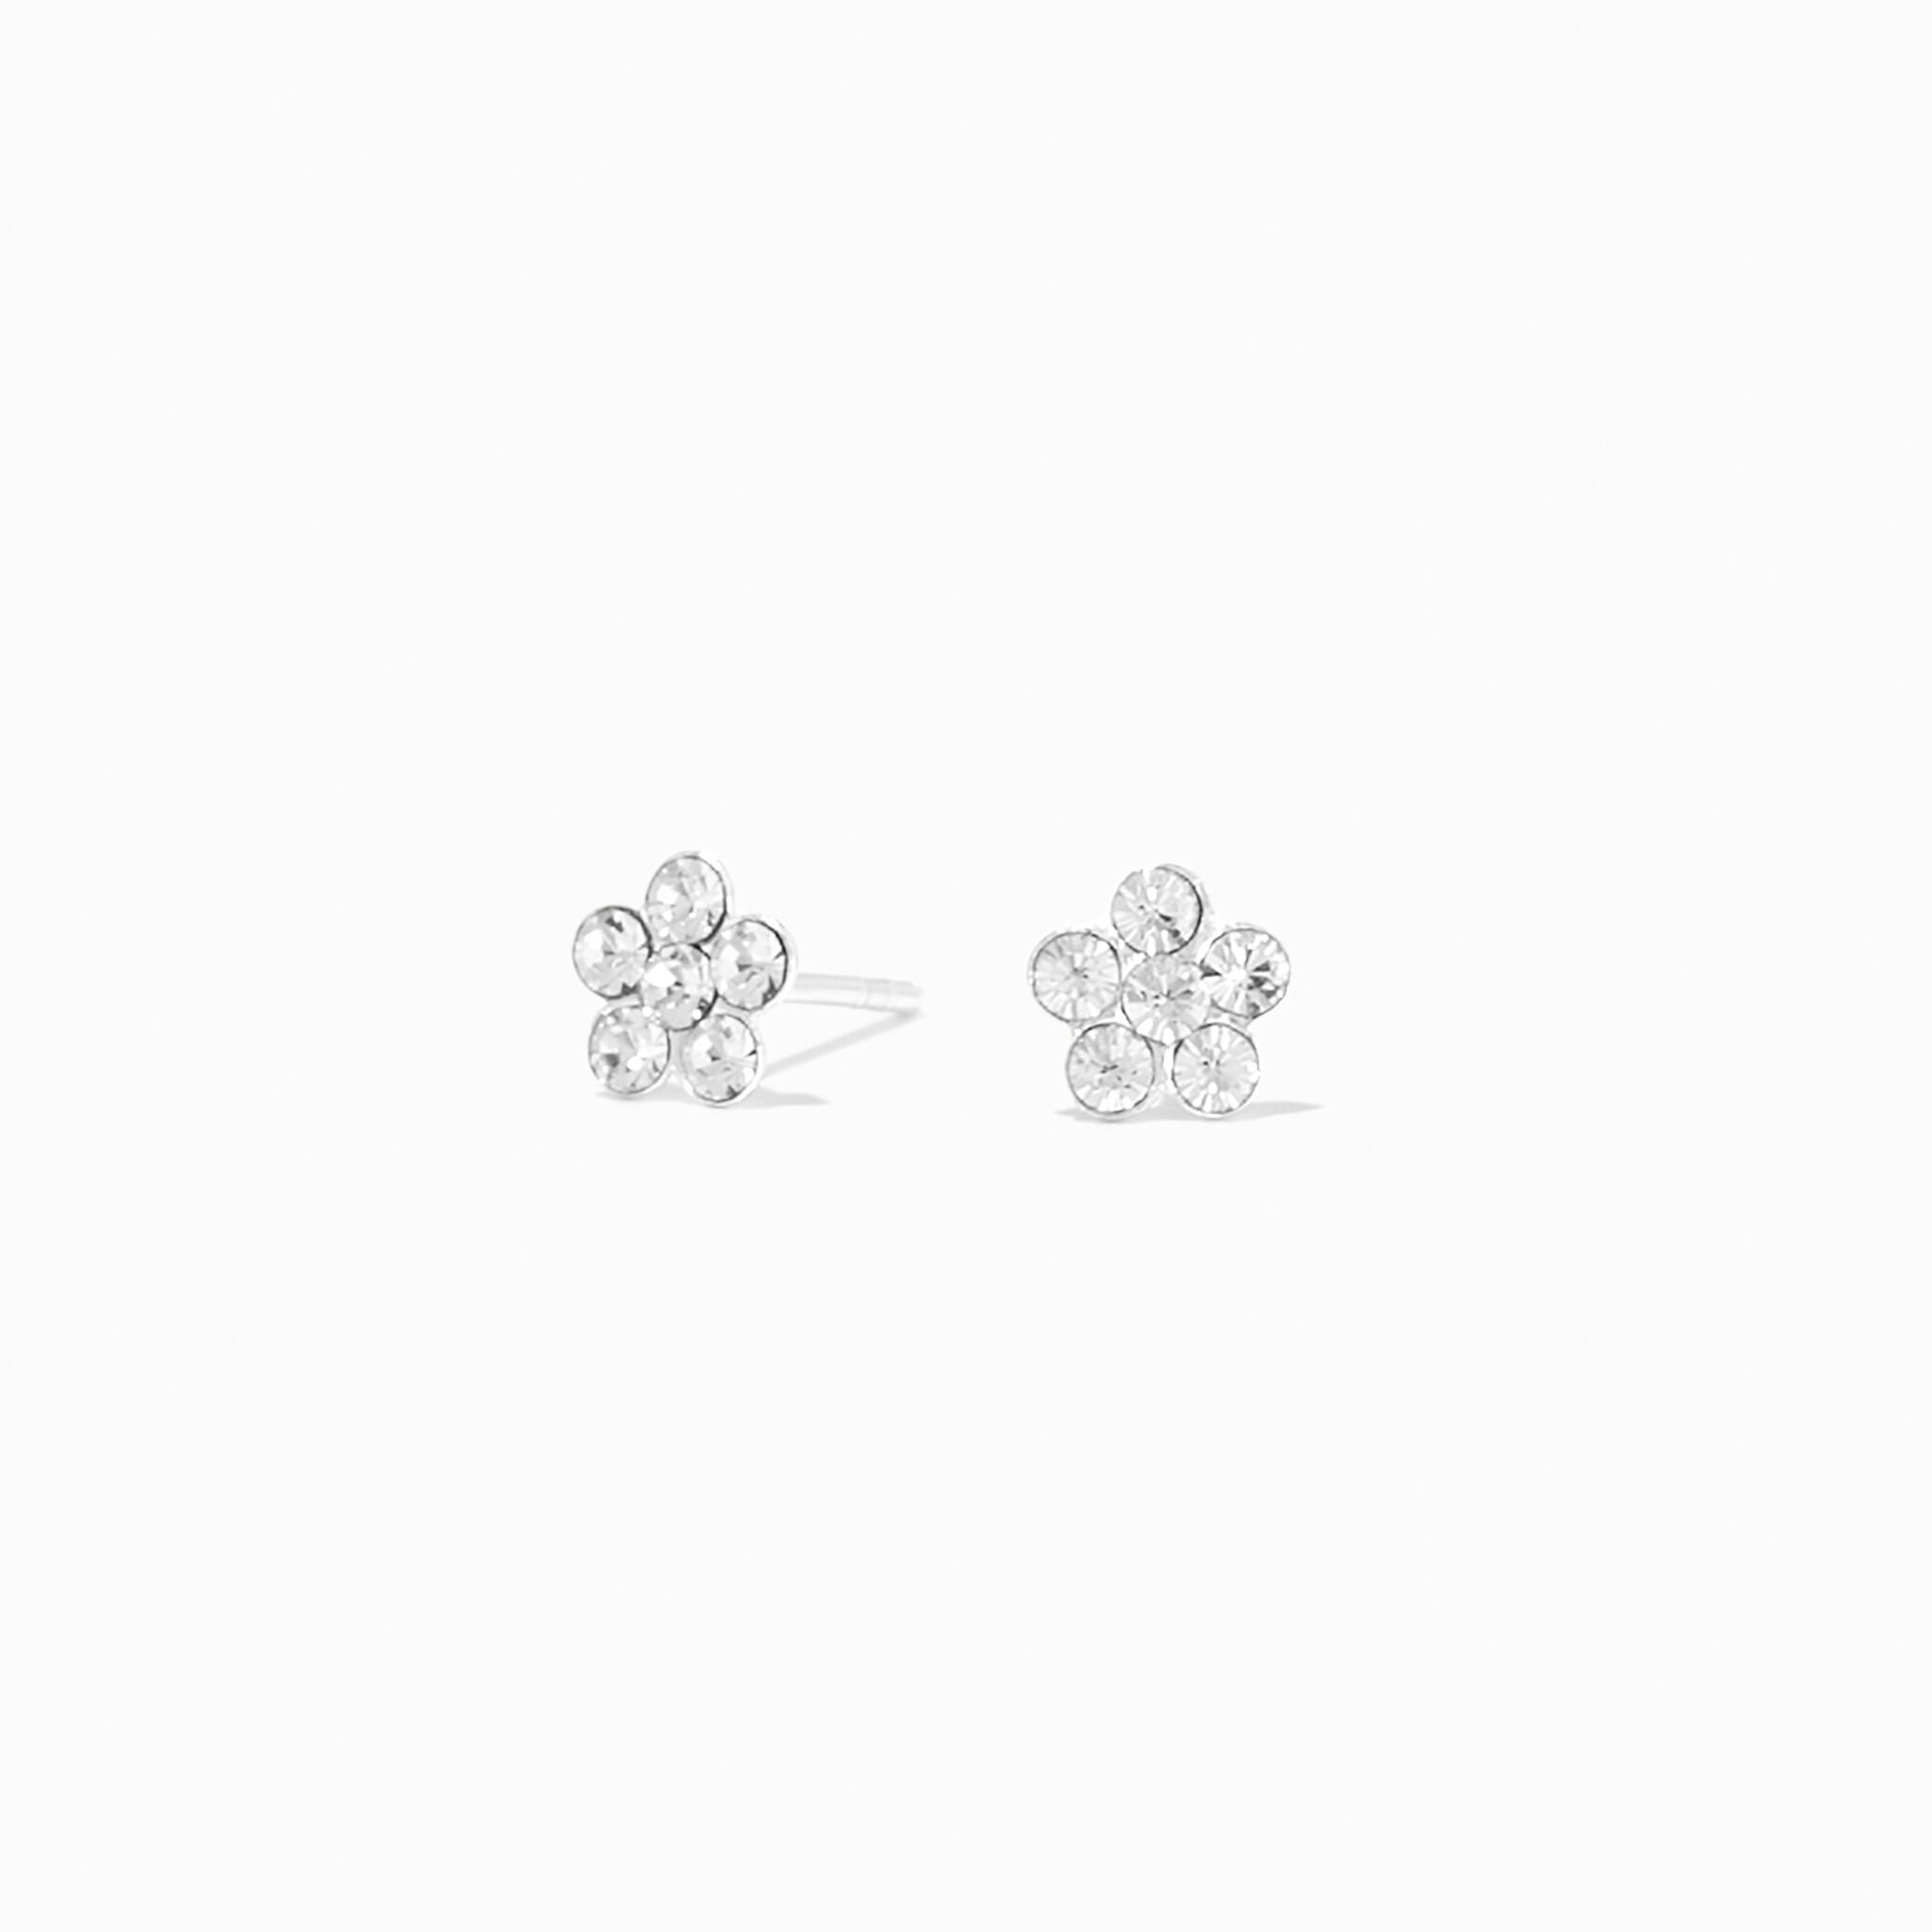 View Claires Crystal Daisy Stud Earrings Silver information